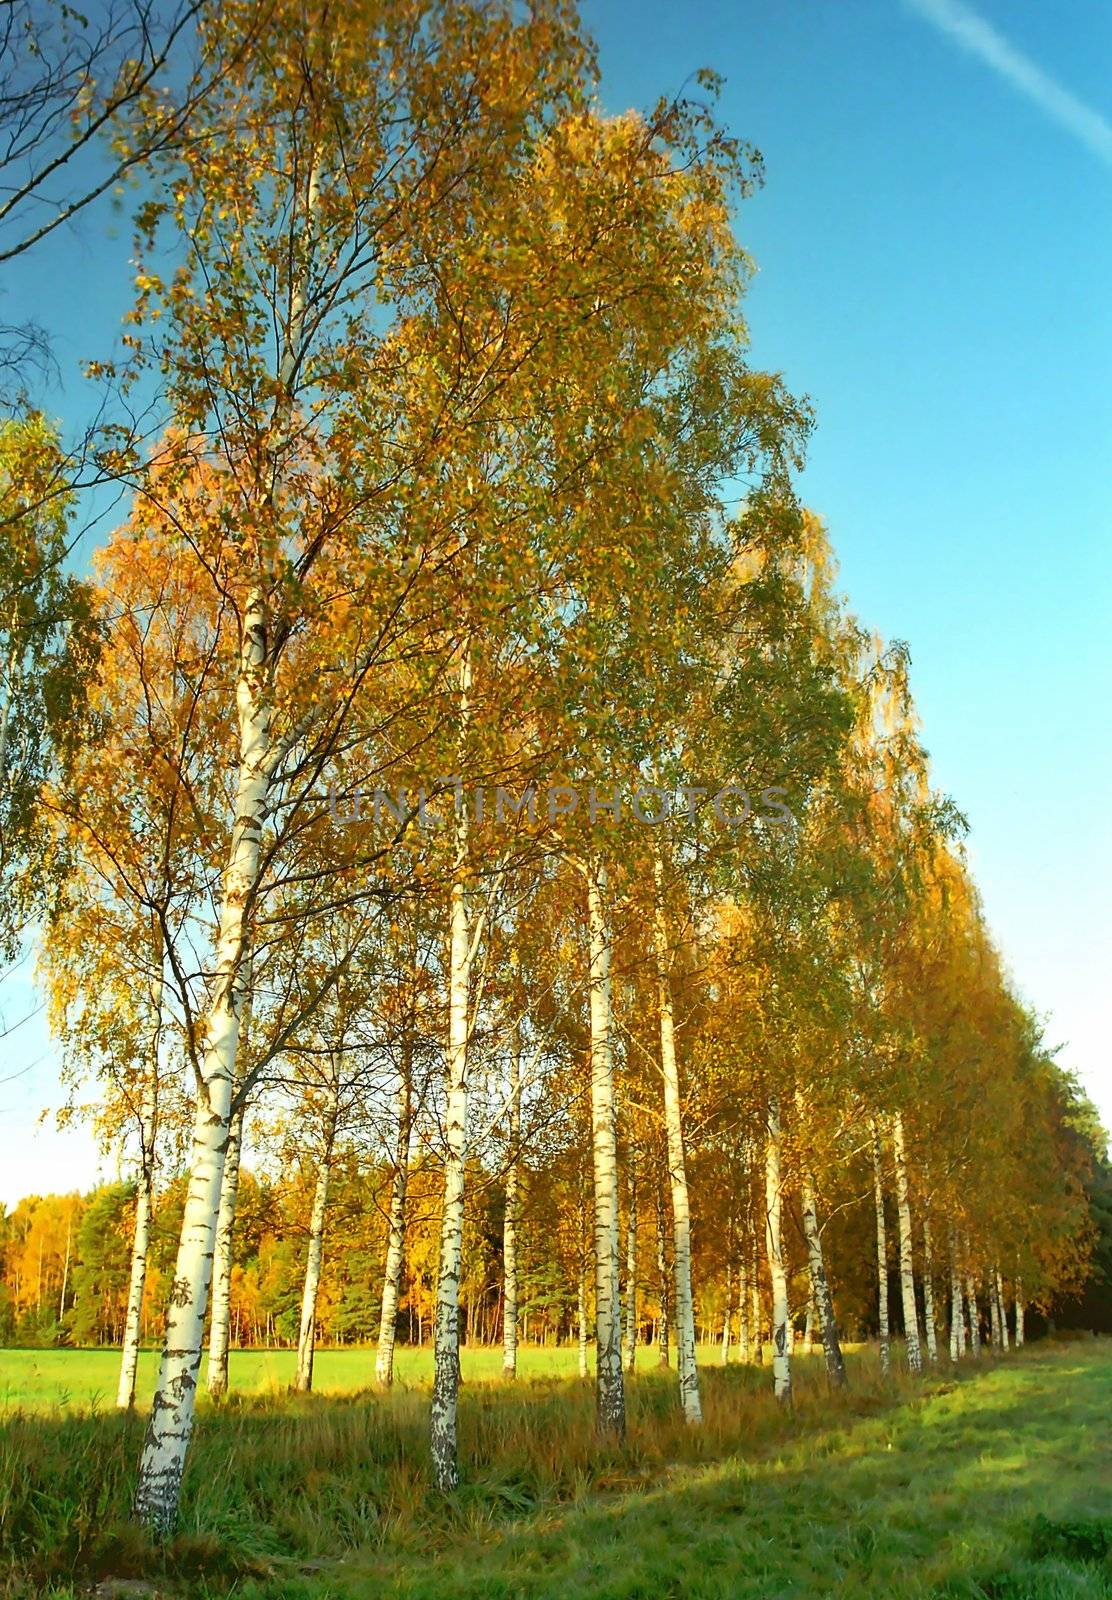 Birches alley in autumn colors by mulden